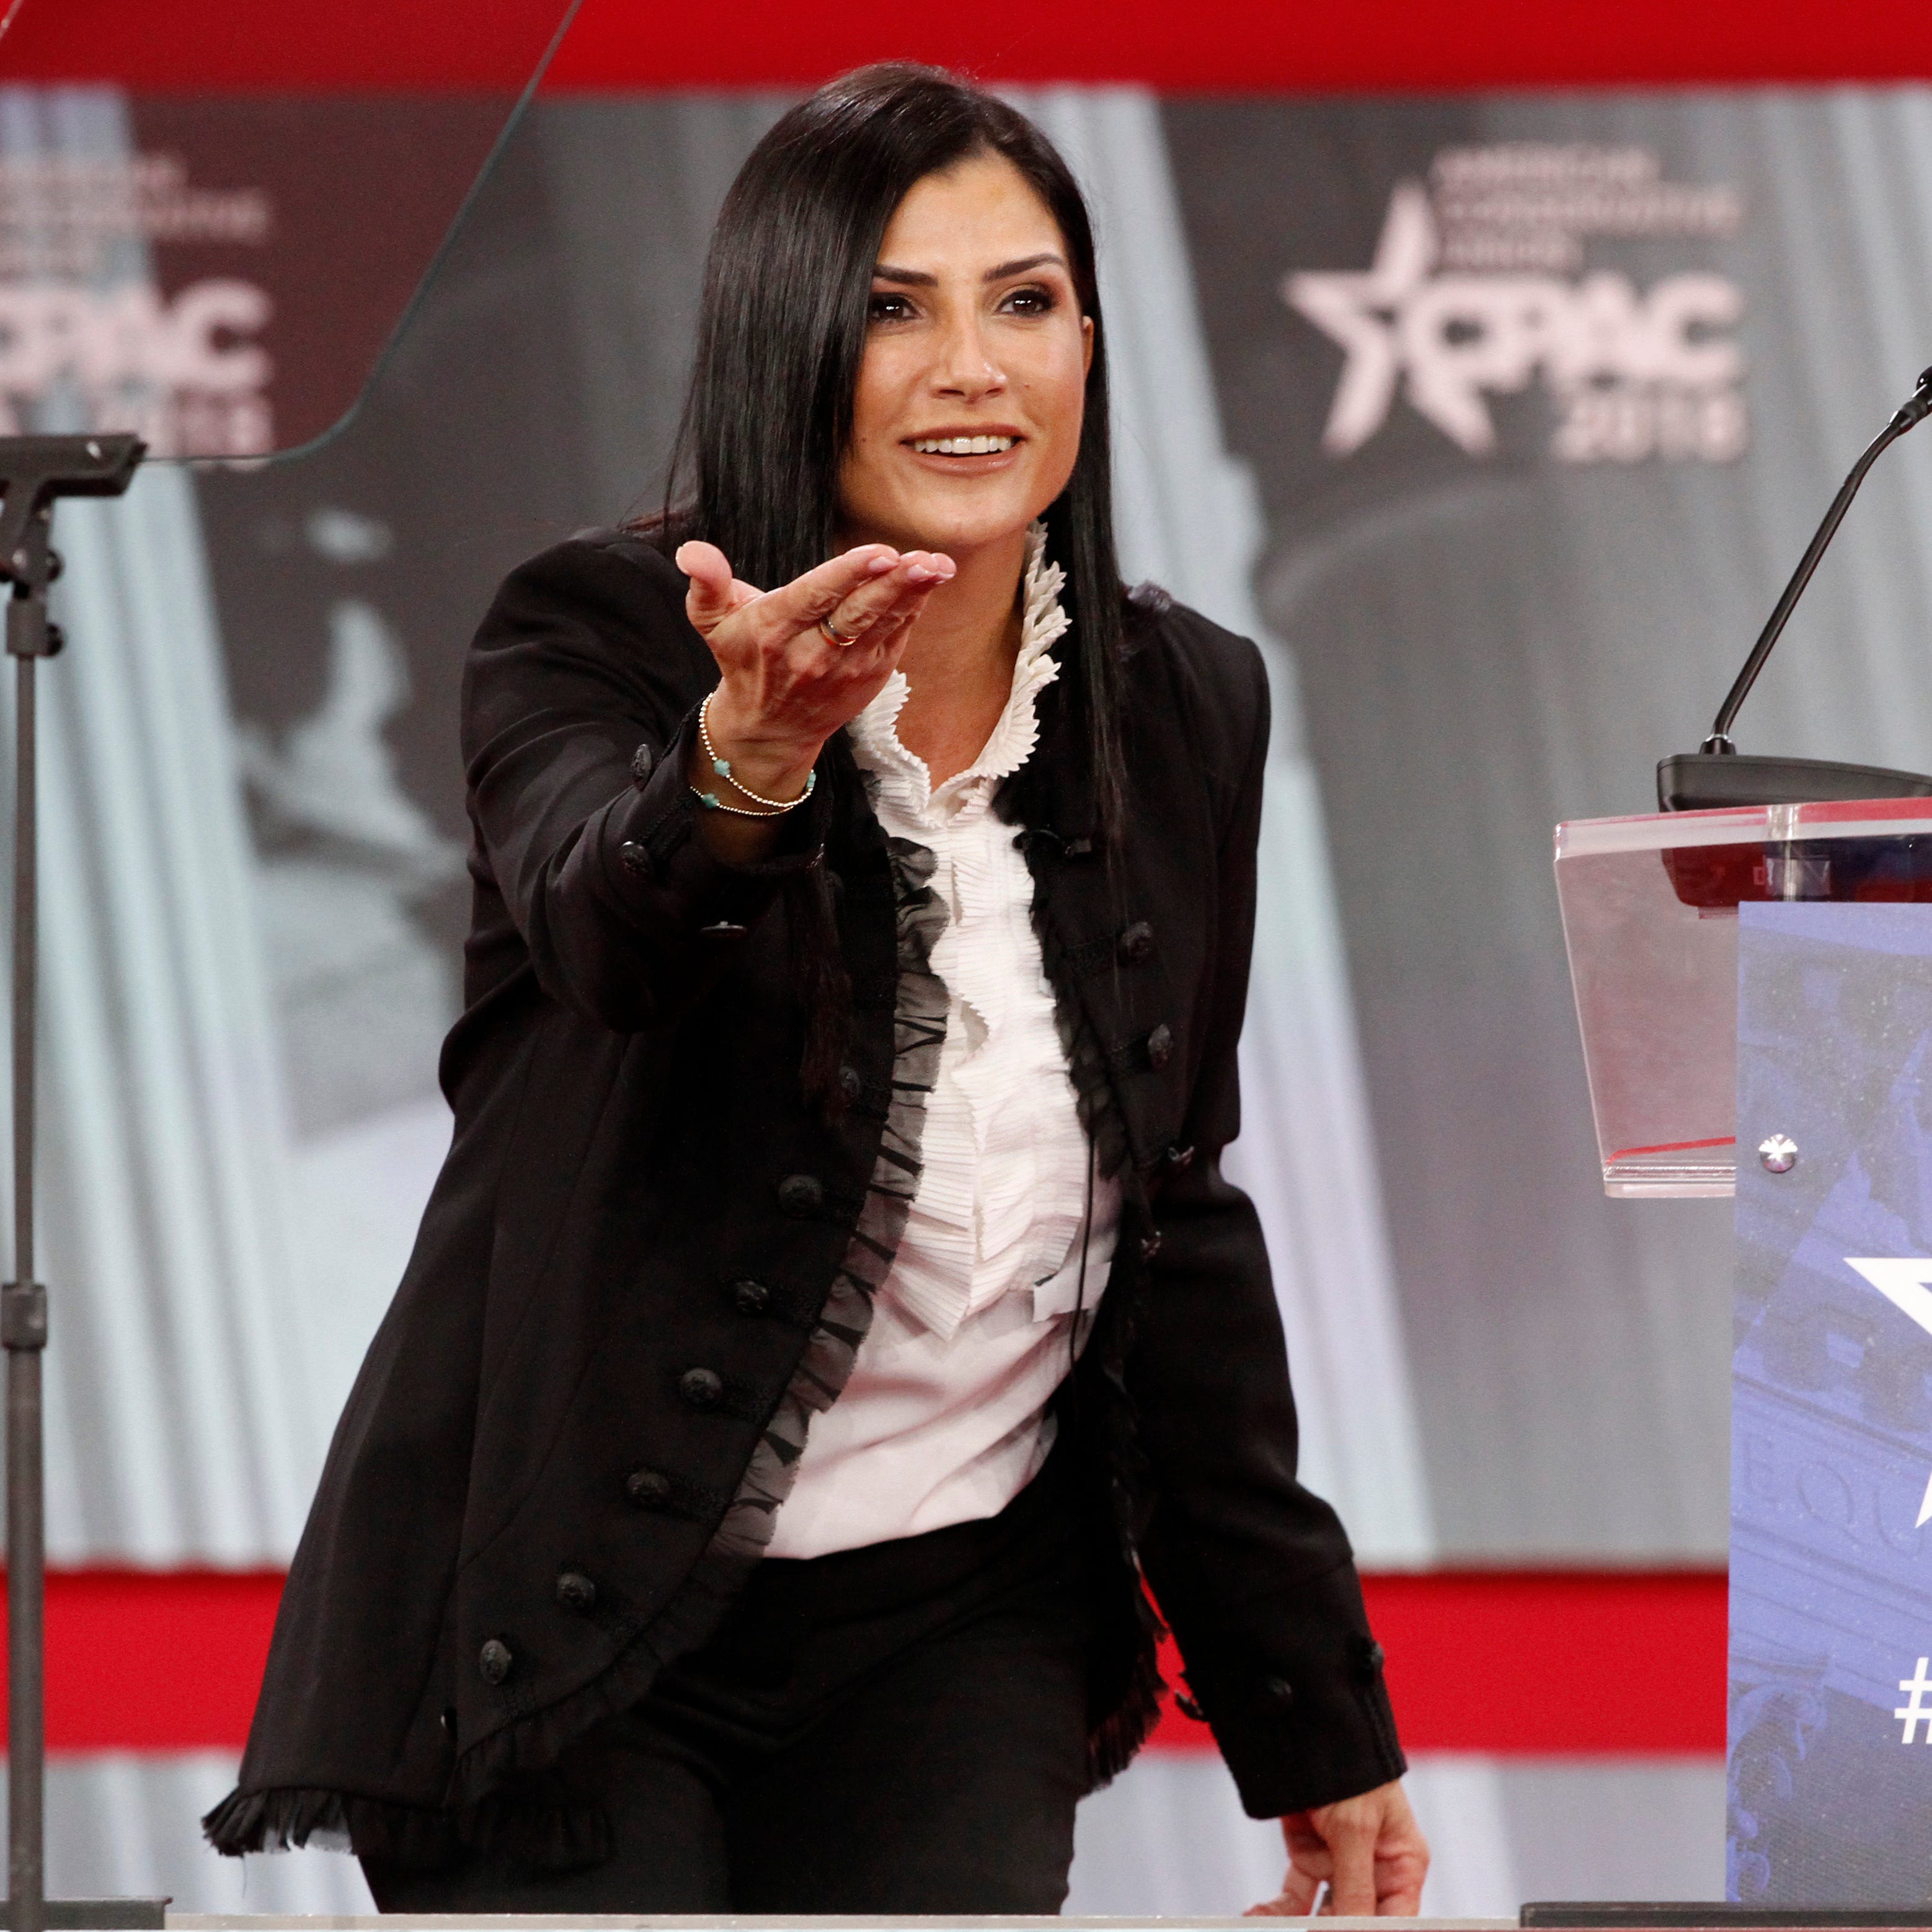 In this Feb. 22, 2018, photo, Dana Loesch, spokeswoman for the National Rifle Association, speaks at the Conservative Political Action Conference (CPAC), at National Harbor, Md.